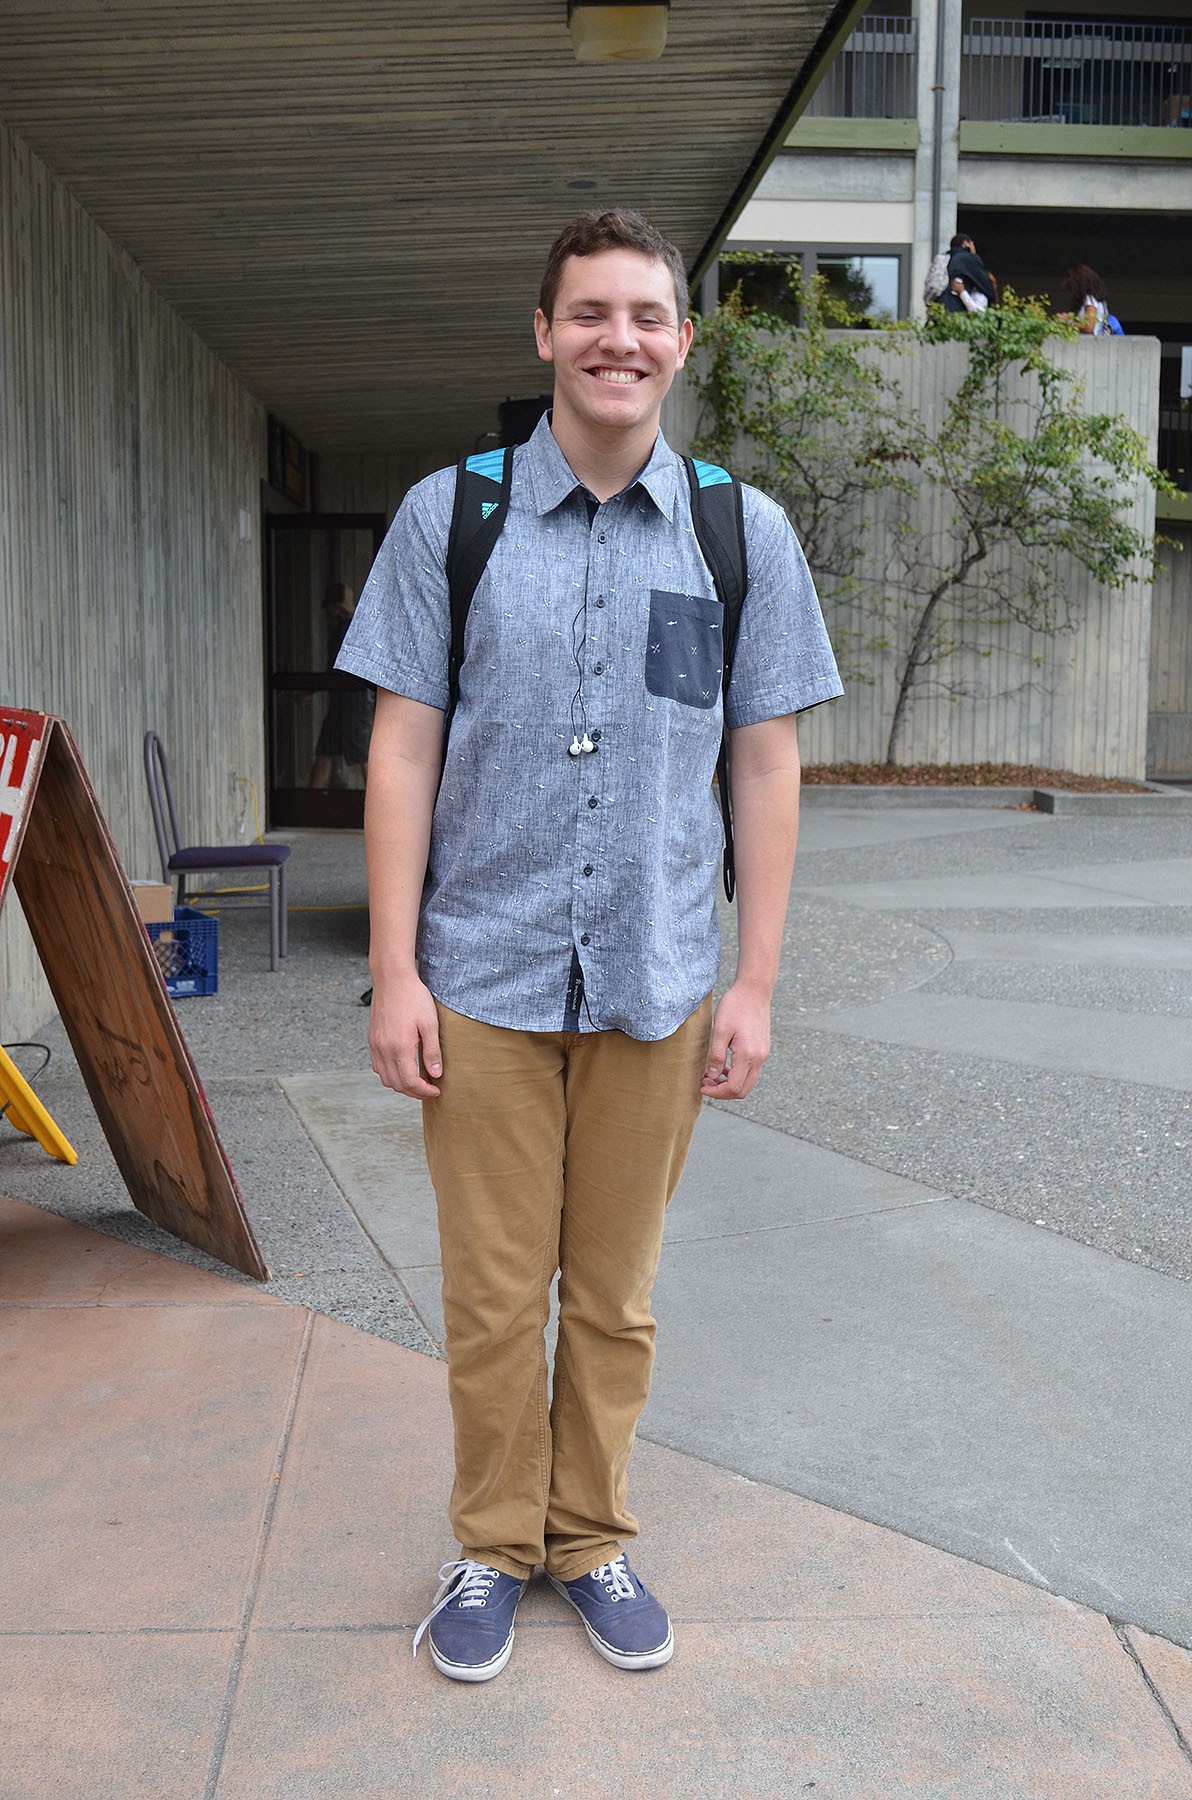 Los Angeles native and business student Daniel finds the people in Humboldt "really chill." Also chill are his Vans, Tilly's shirt and khakis. - PHOTO BY SHARON RUCHTE